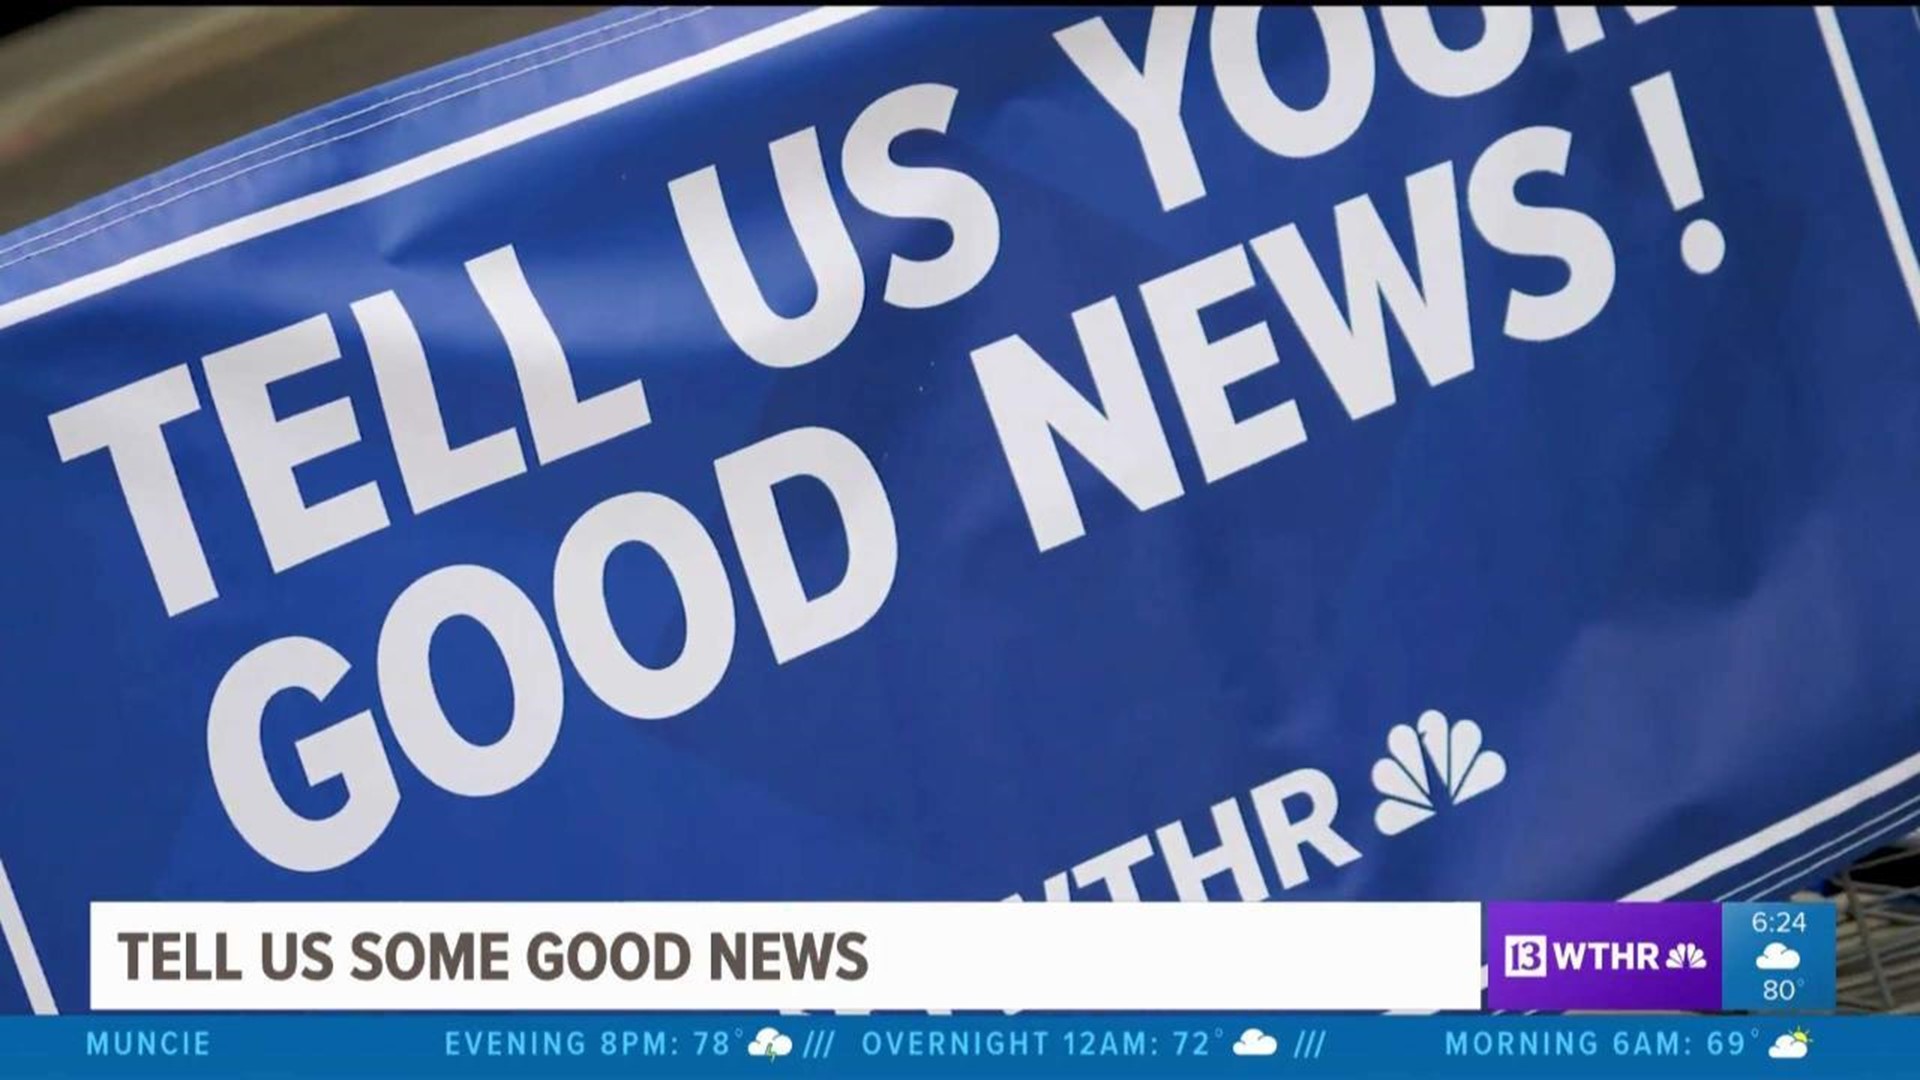 Tell us your good news